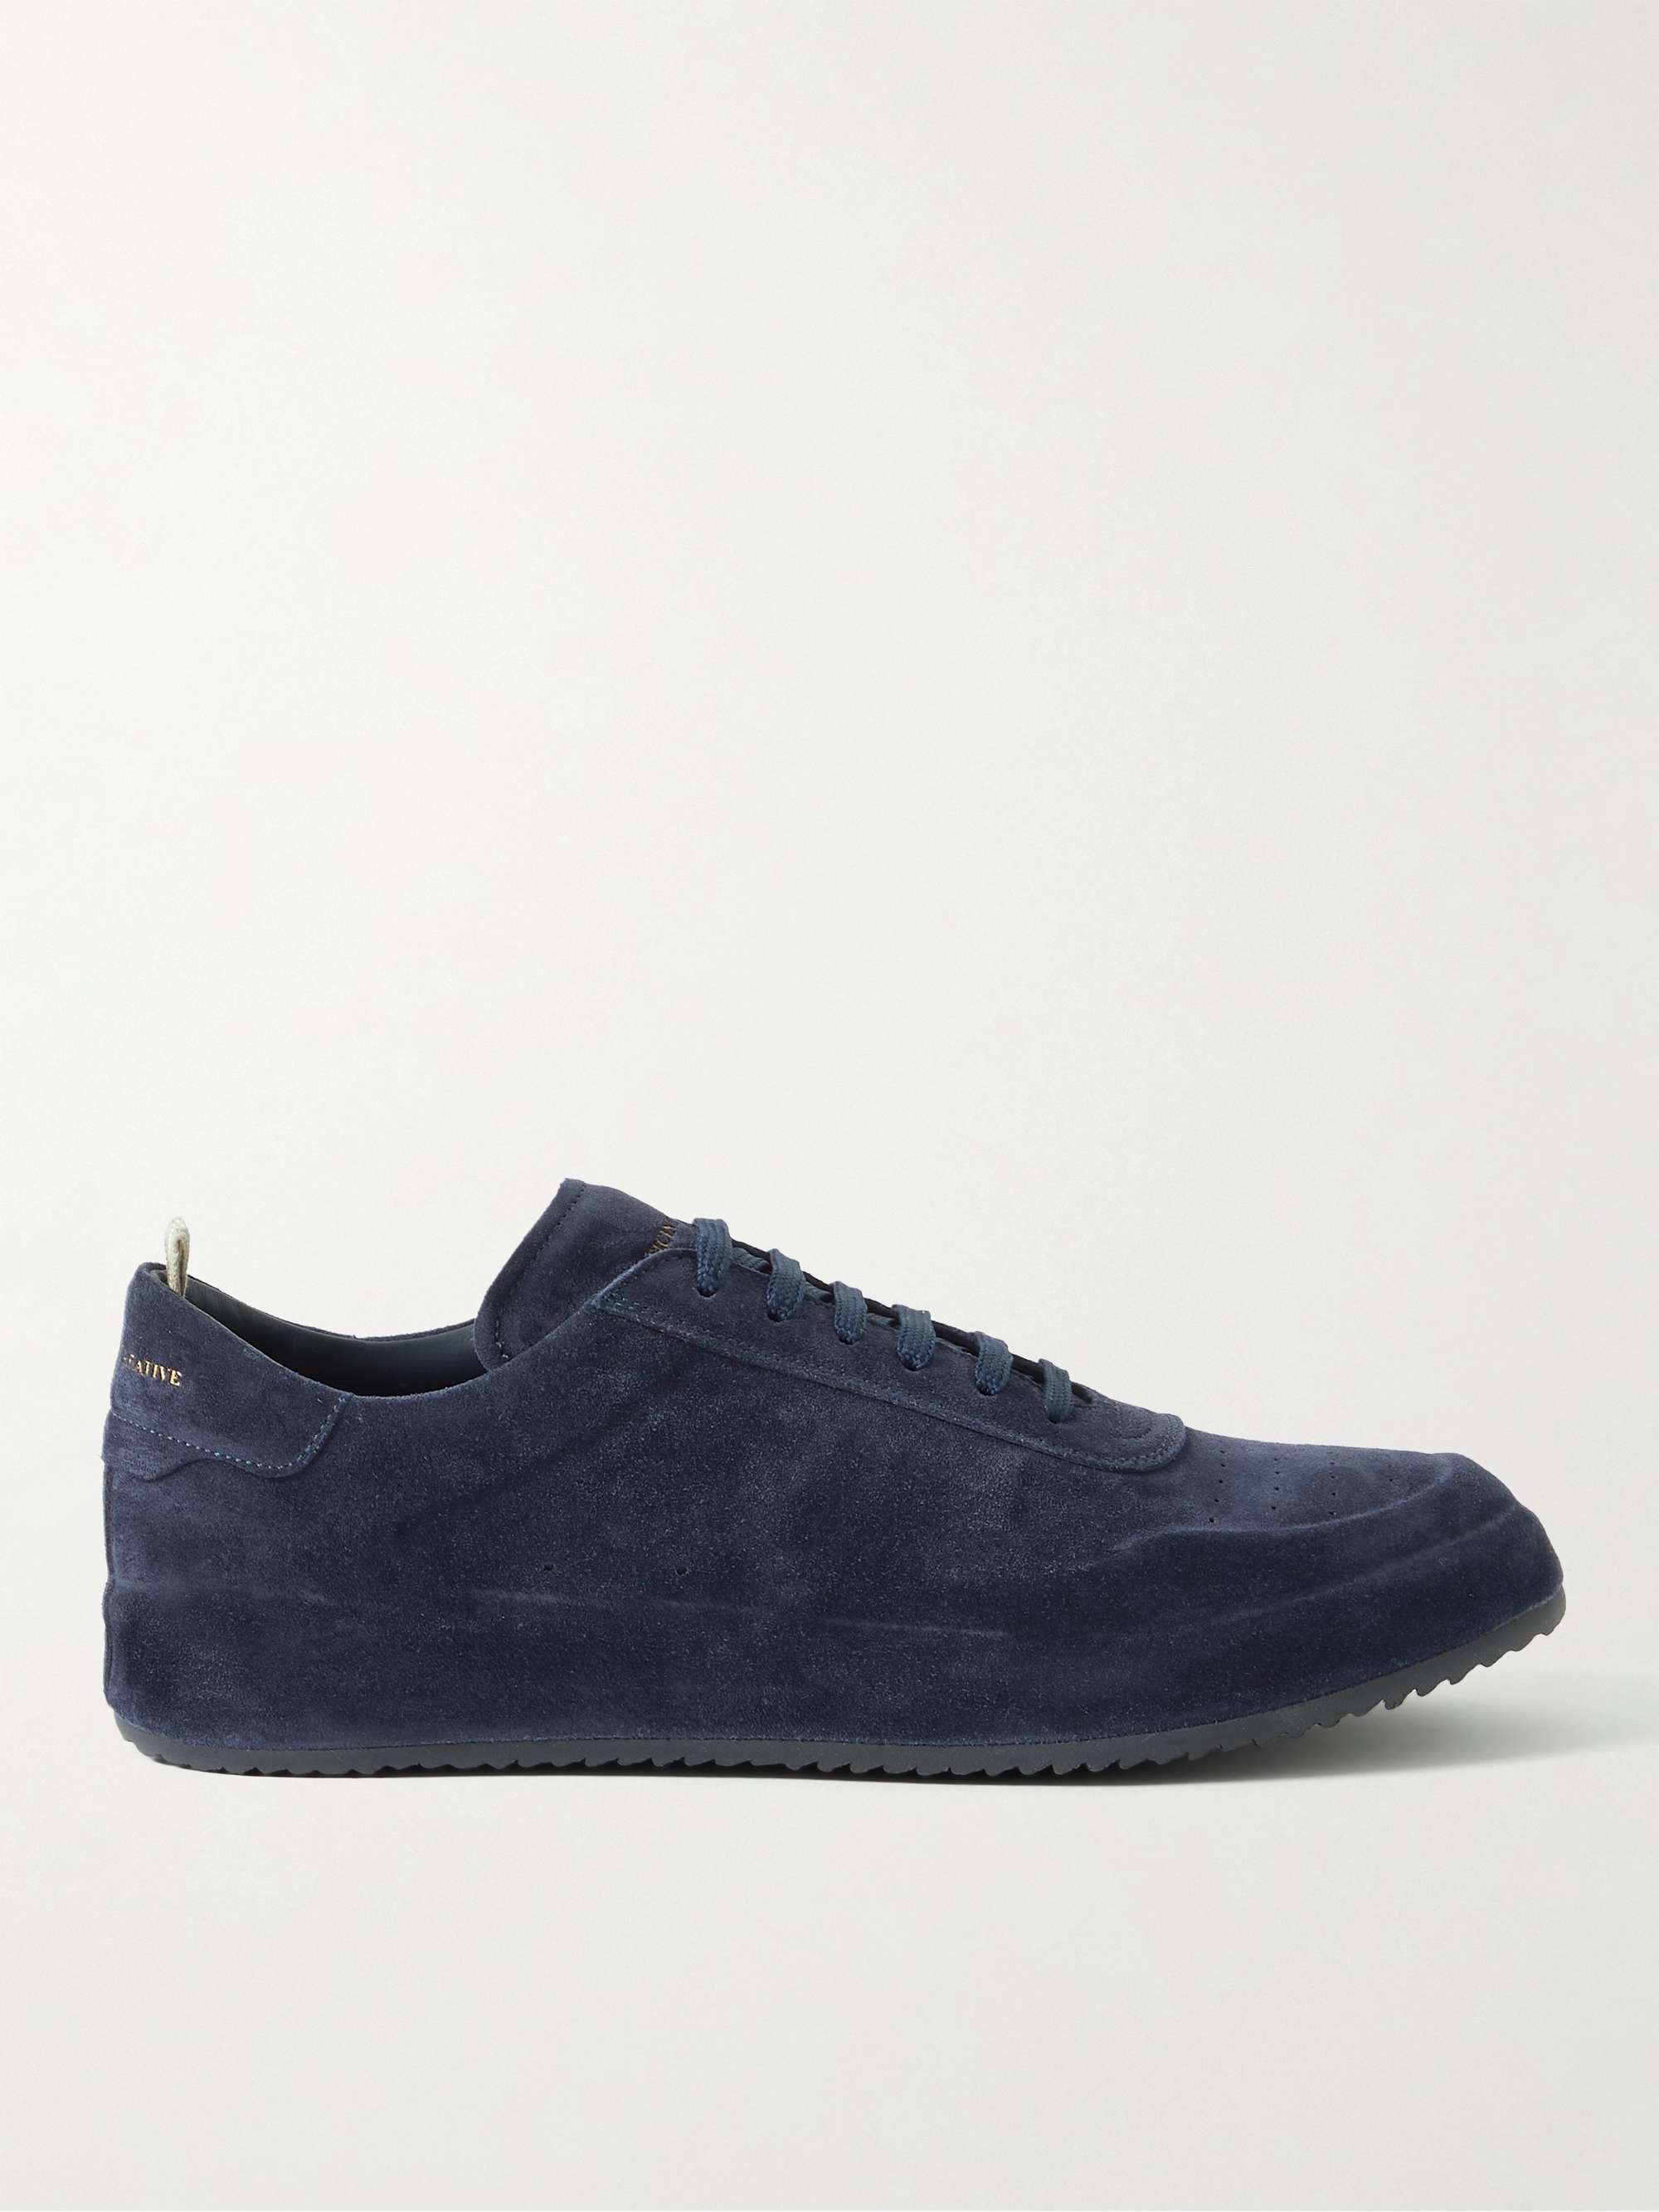 OFFICINE CREATIVE Ace Suede Sneakers for Men | MR PORTER